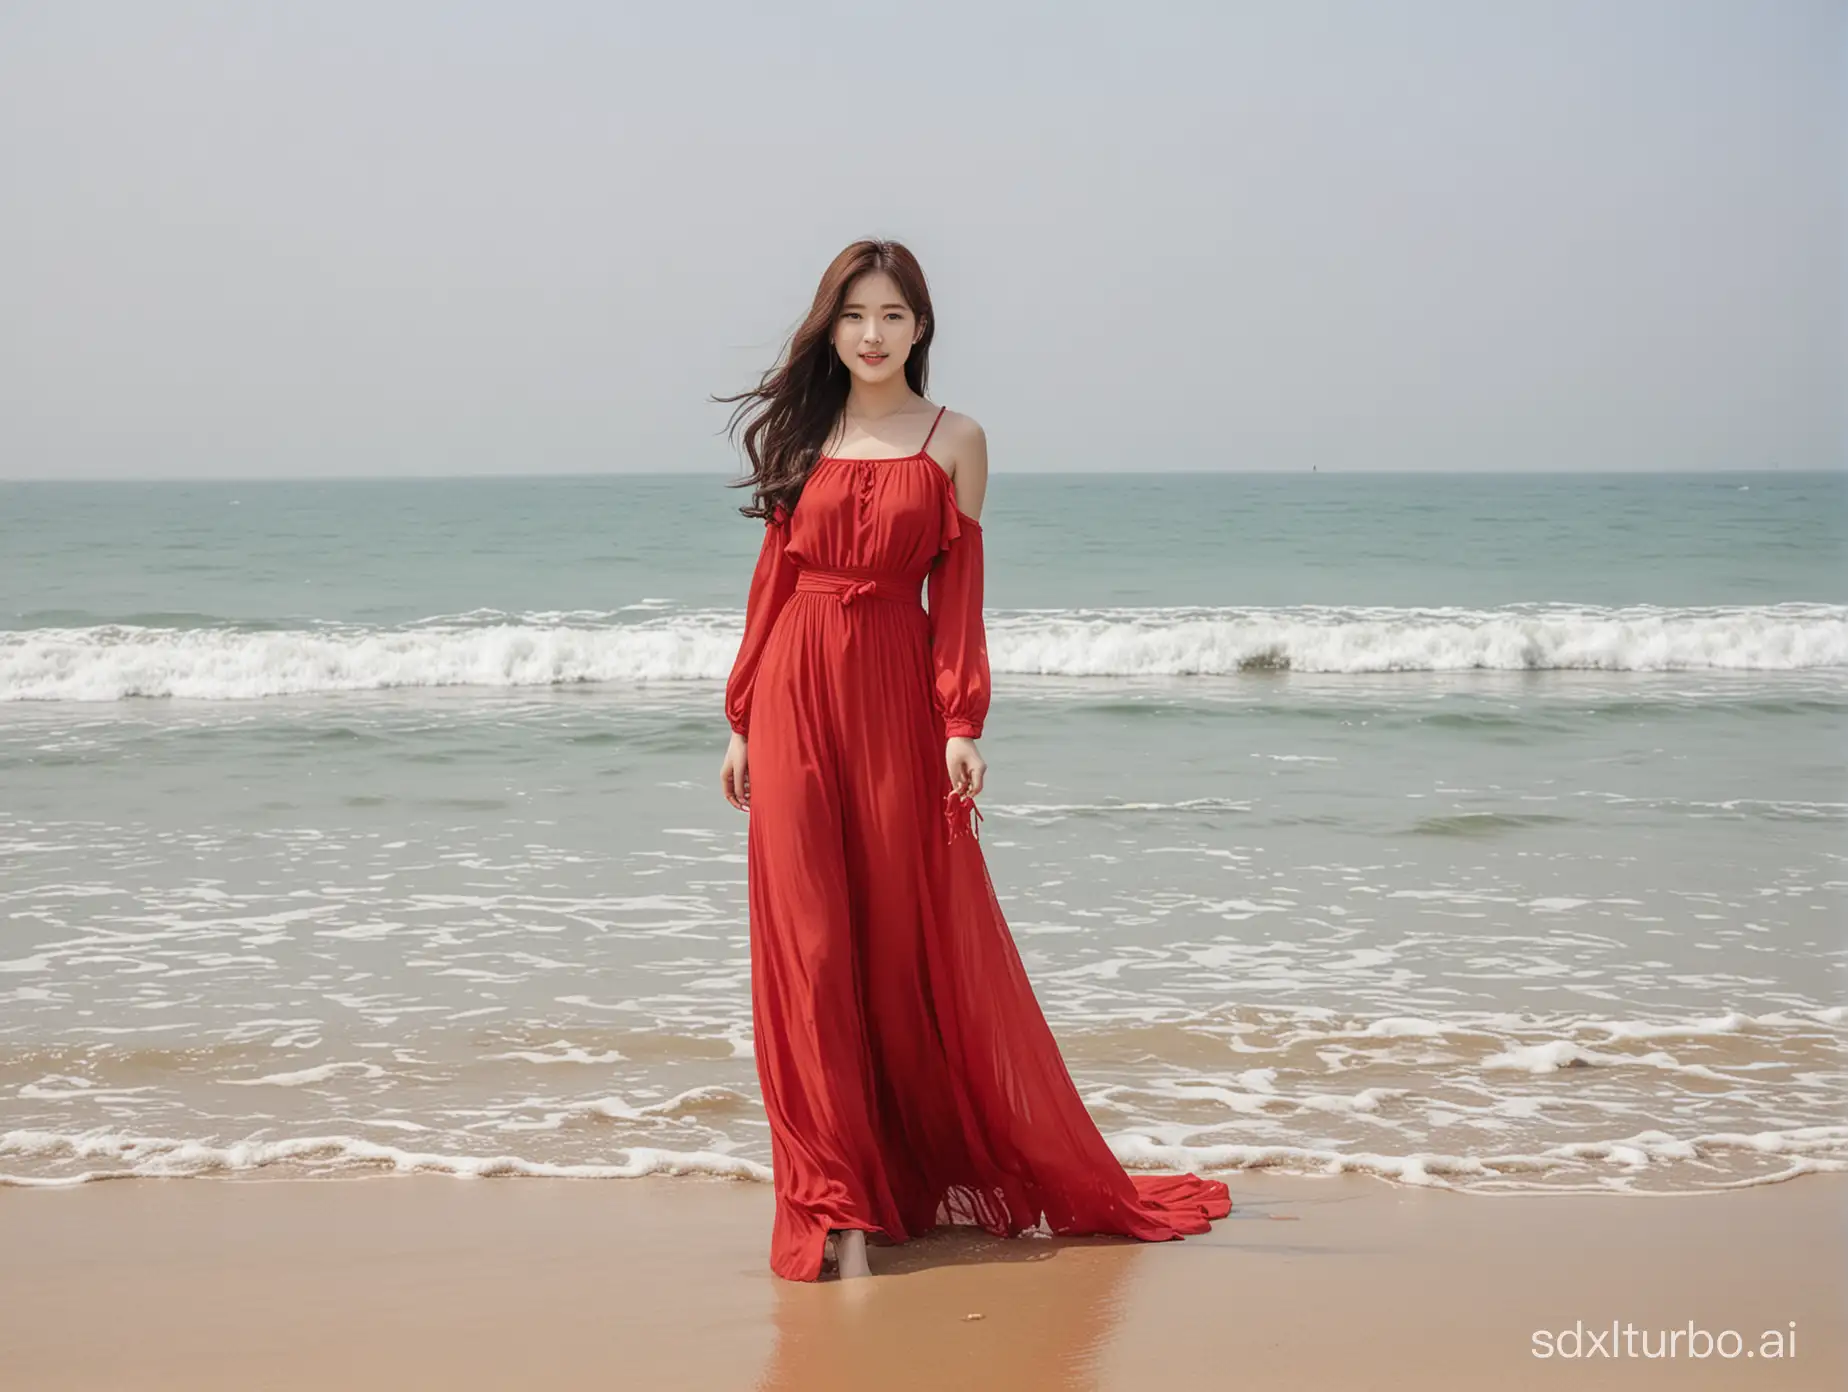 Korean girl with red long dress in the beach